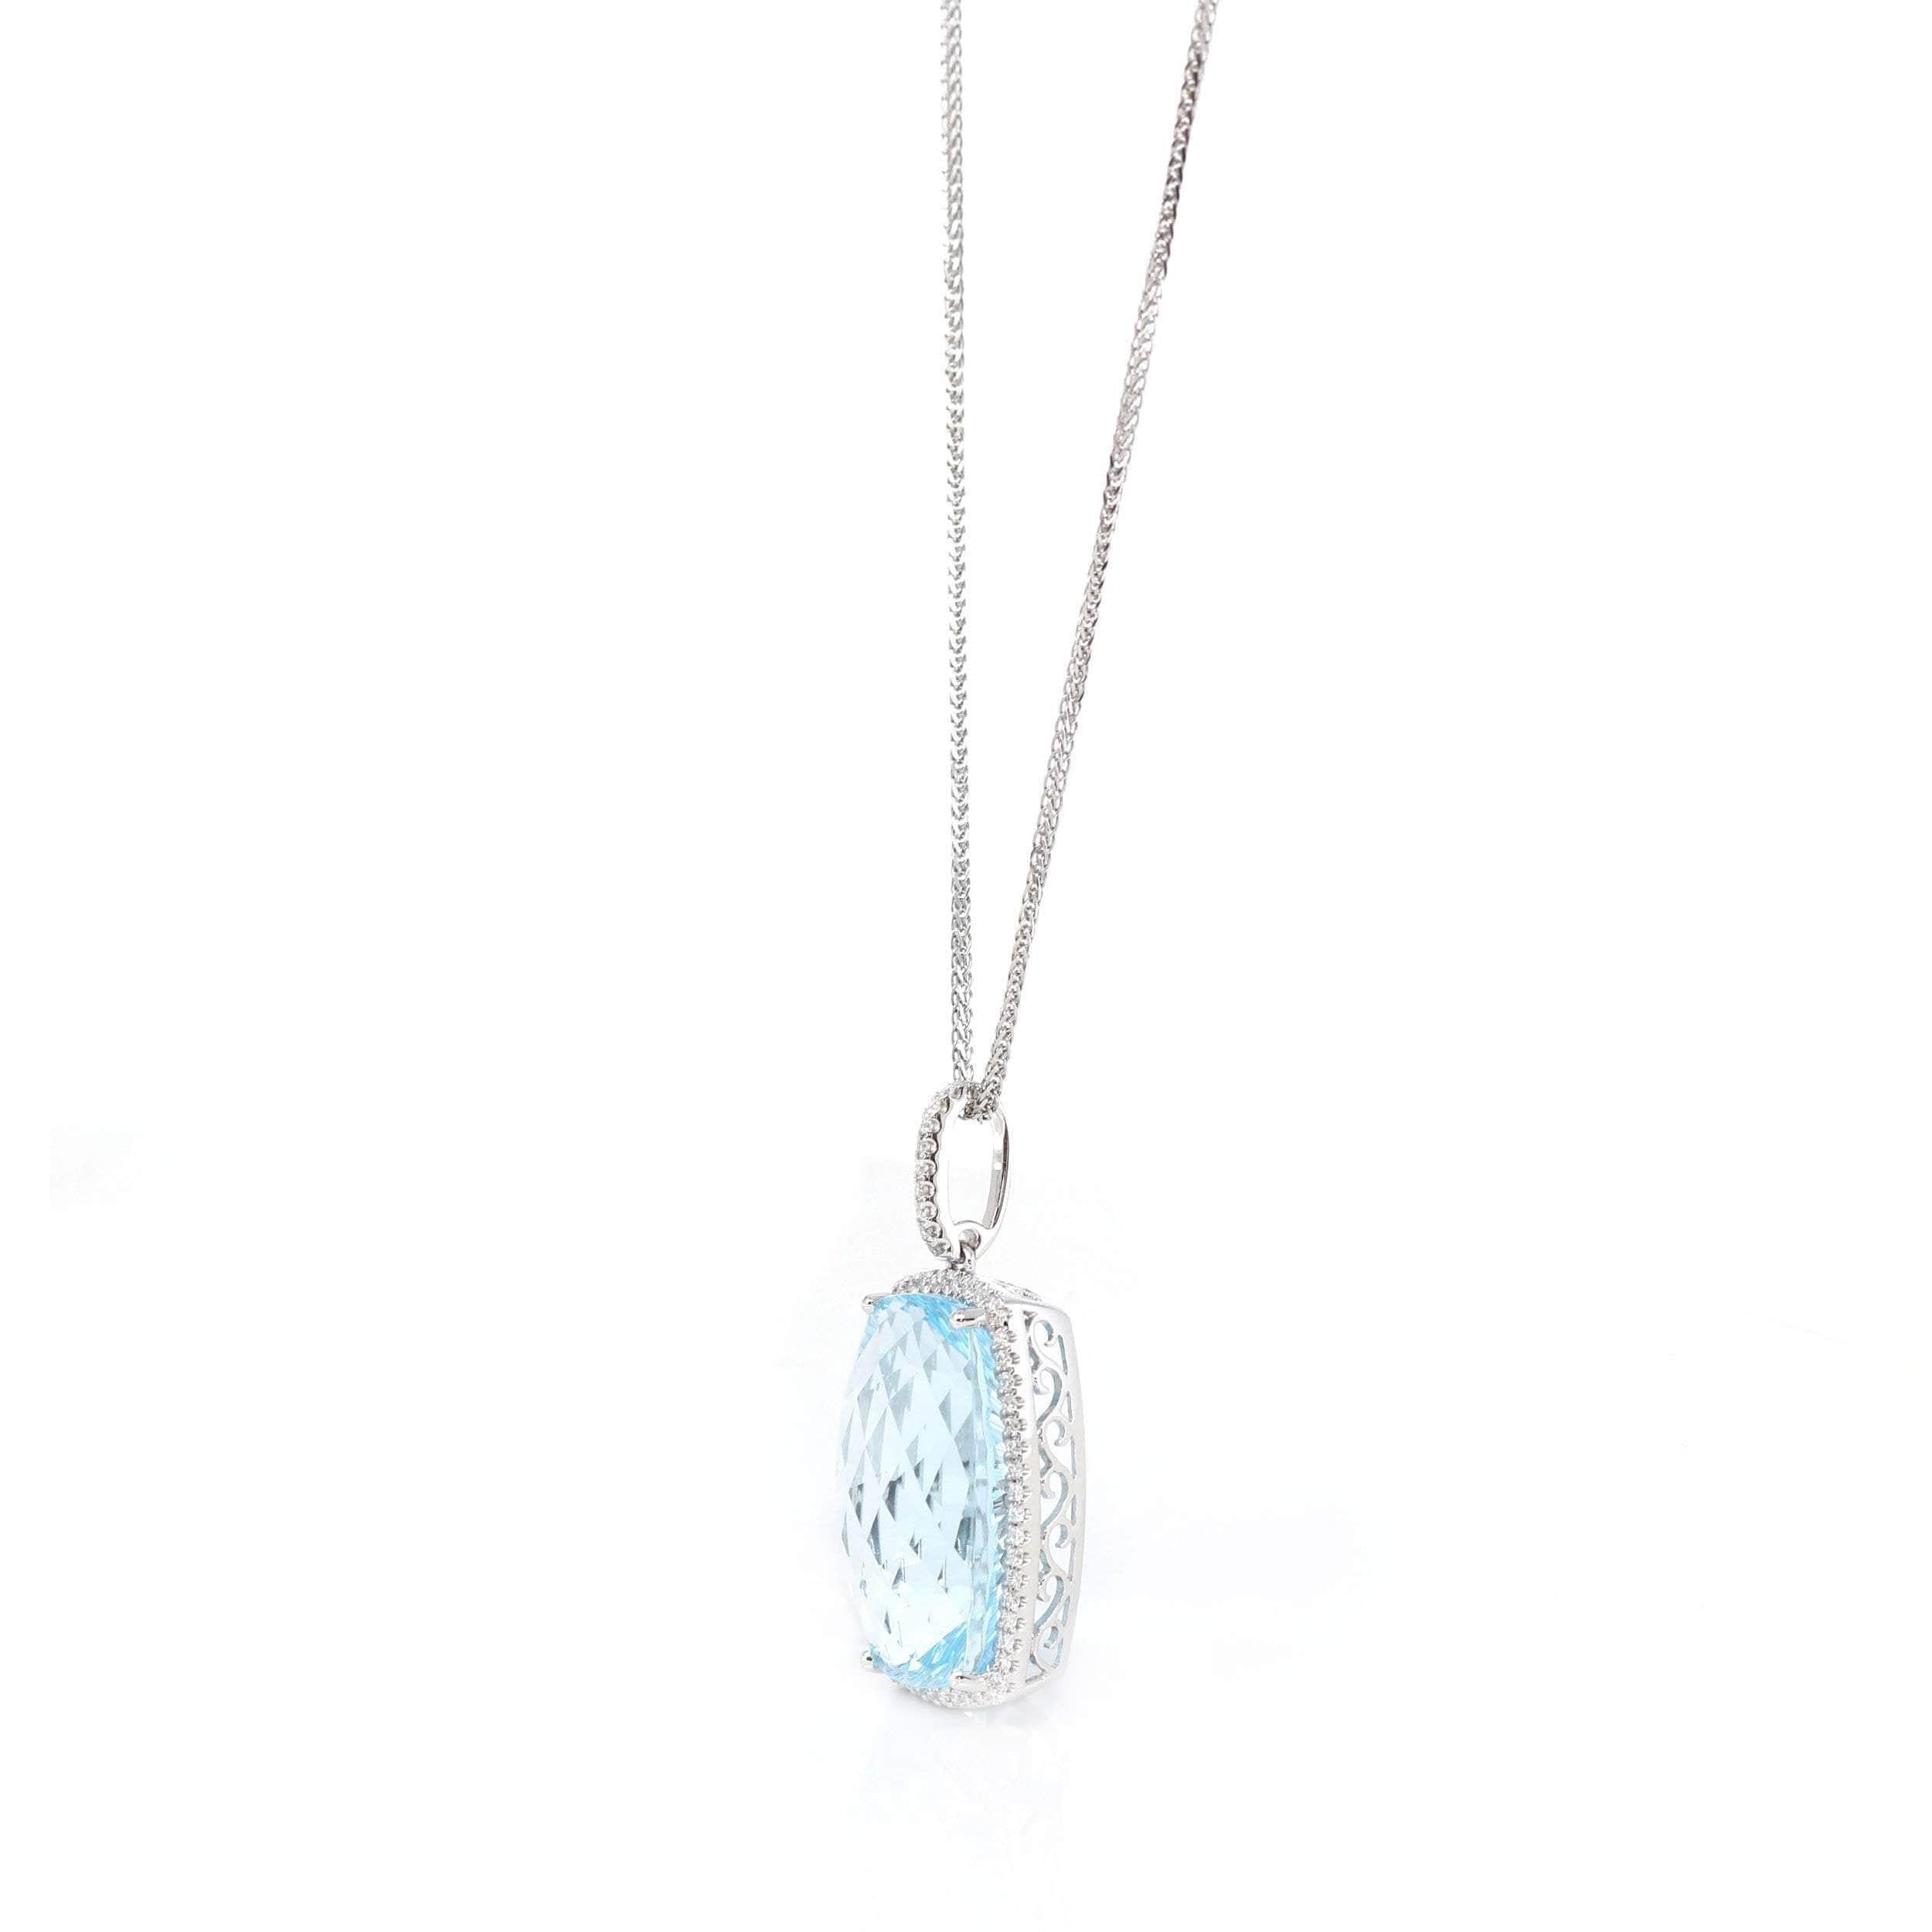 ﻿* ORIGINAL DESIGN----- This pendant is made with high-quality genuine AAA nice swiss blue elongated cushion topaz & genuine SI diamonds. Classic yet fashionable. The luxury natural swiss blue topaz is free of inclusions and cracks. The style is